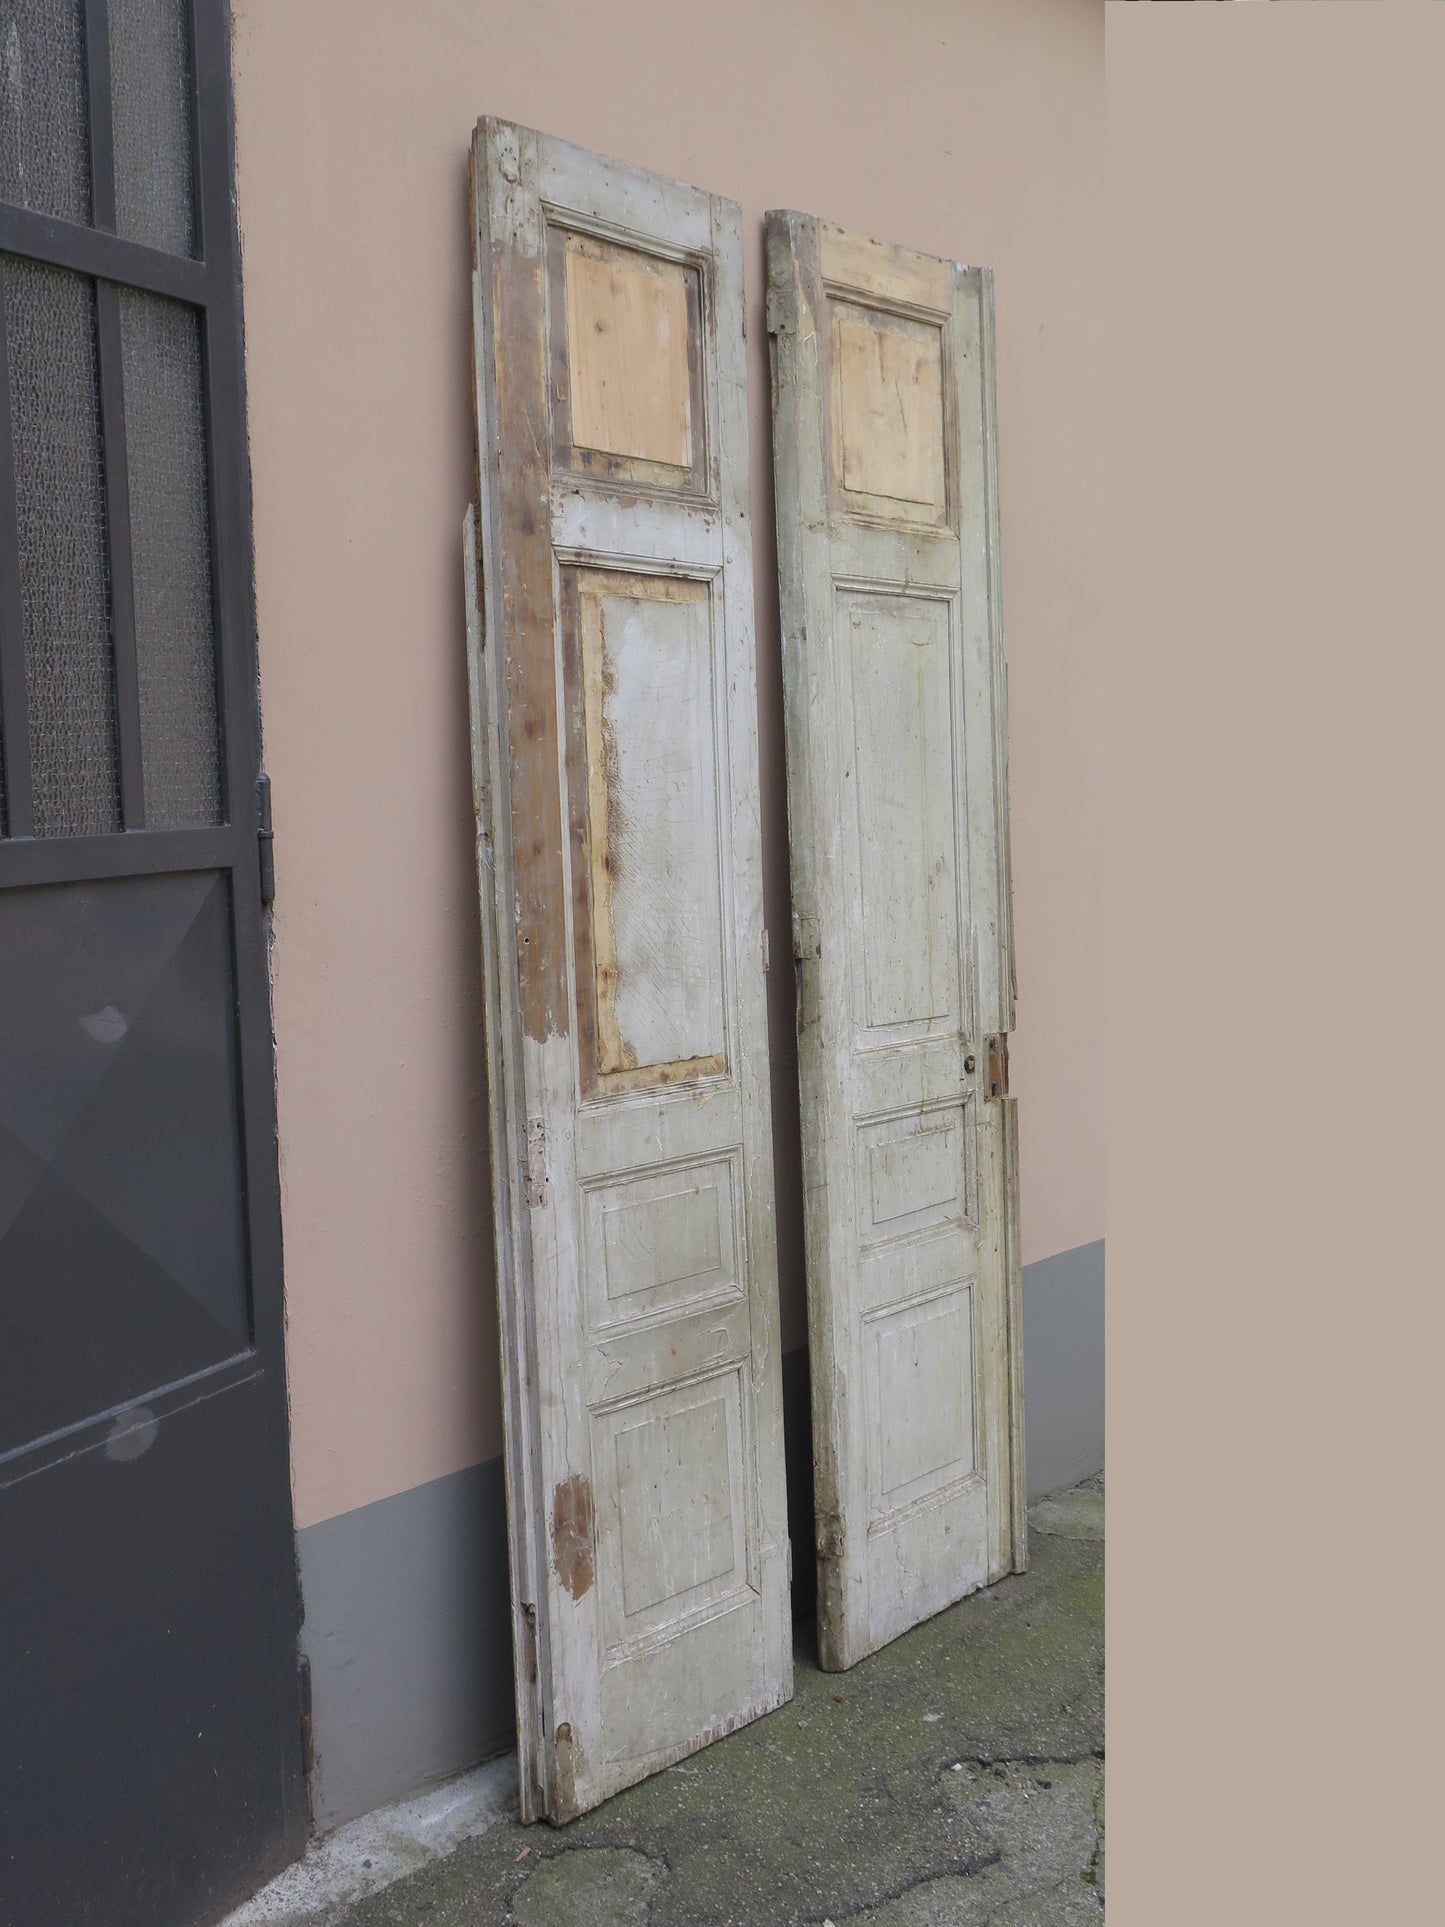 TWO ANCIENT WOODEN DOORS TO BE RESTORED 222x53 cm